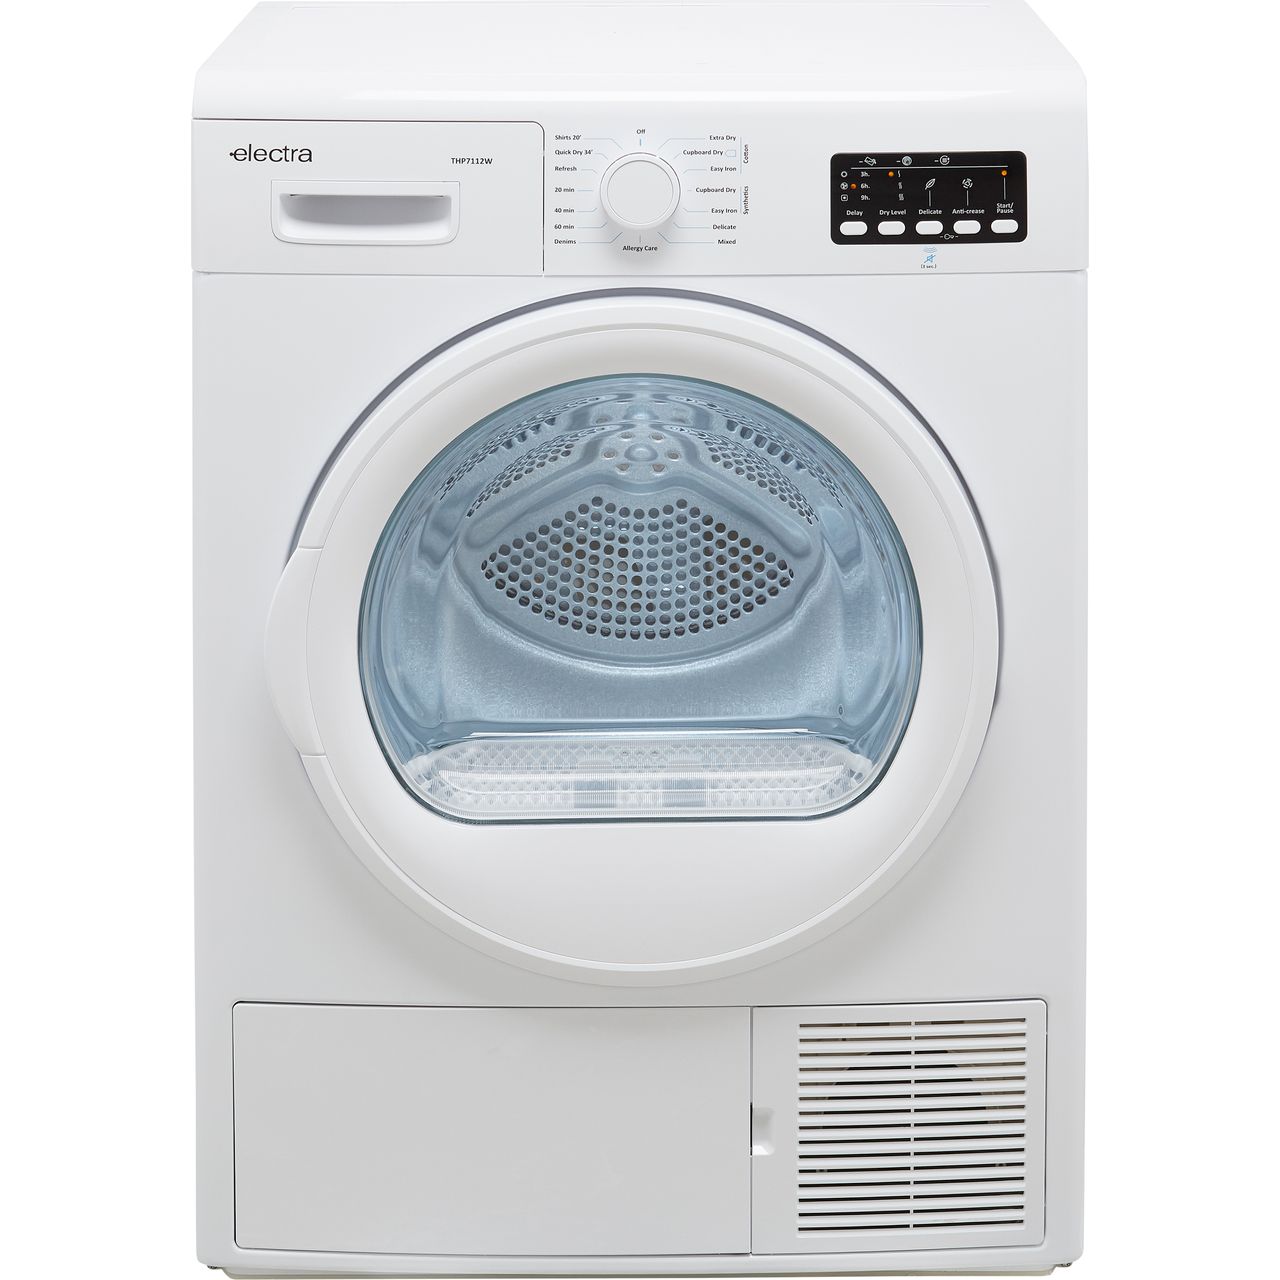 Electra THP7112W 7Kg Heat Pump Tumble Dryer - White - A++ Rated